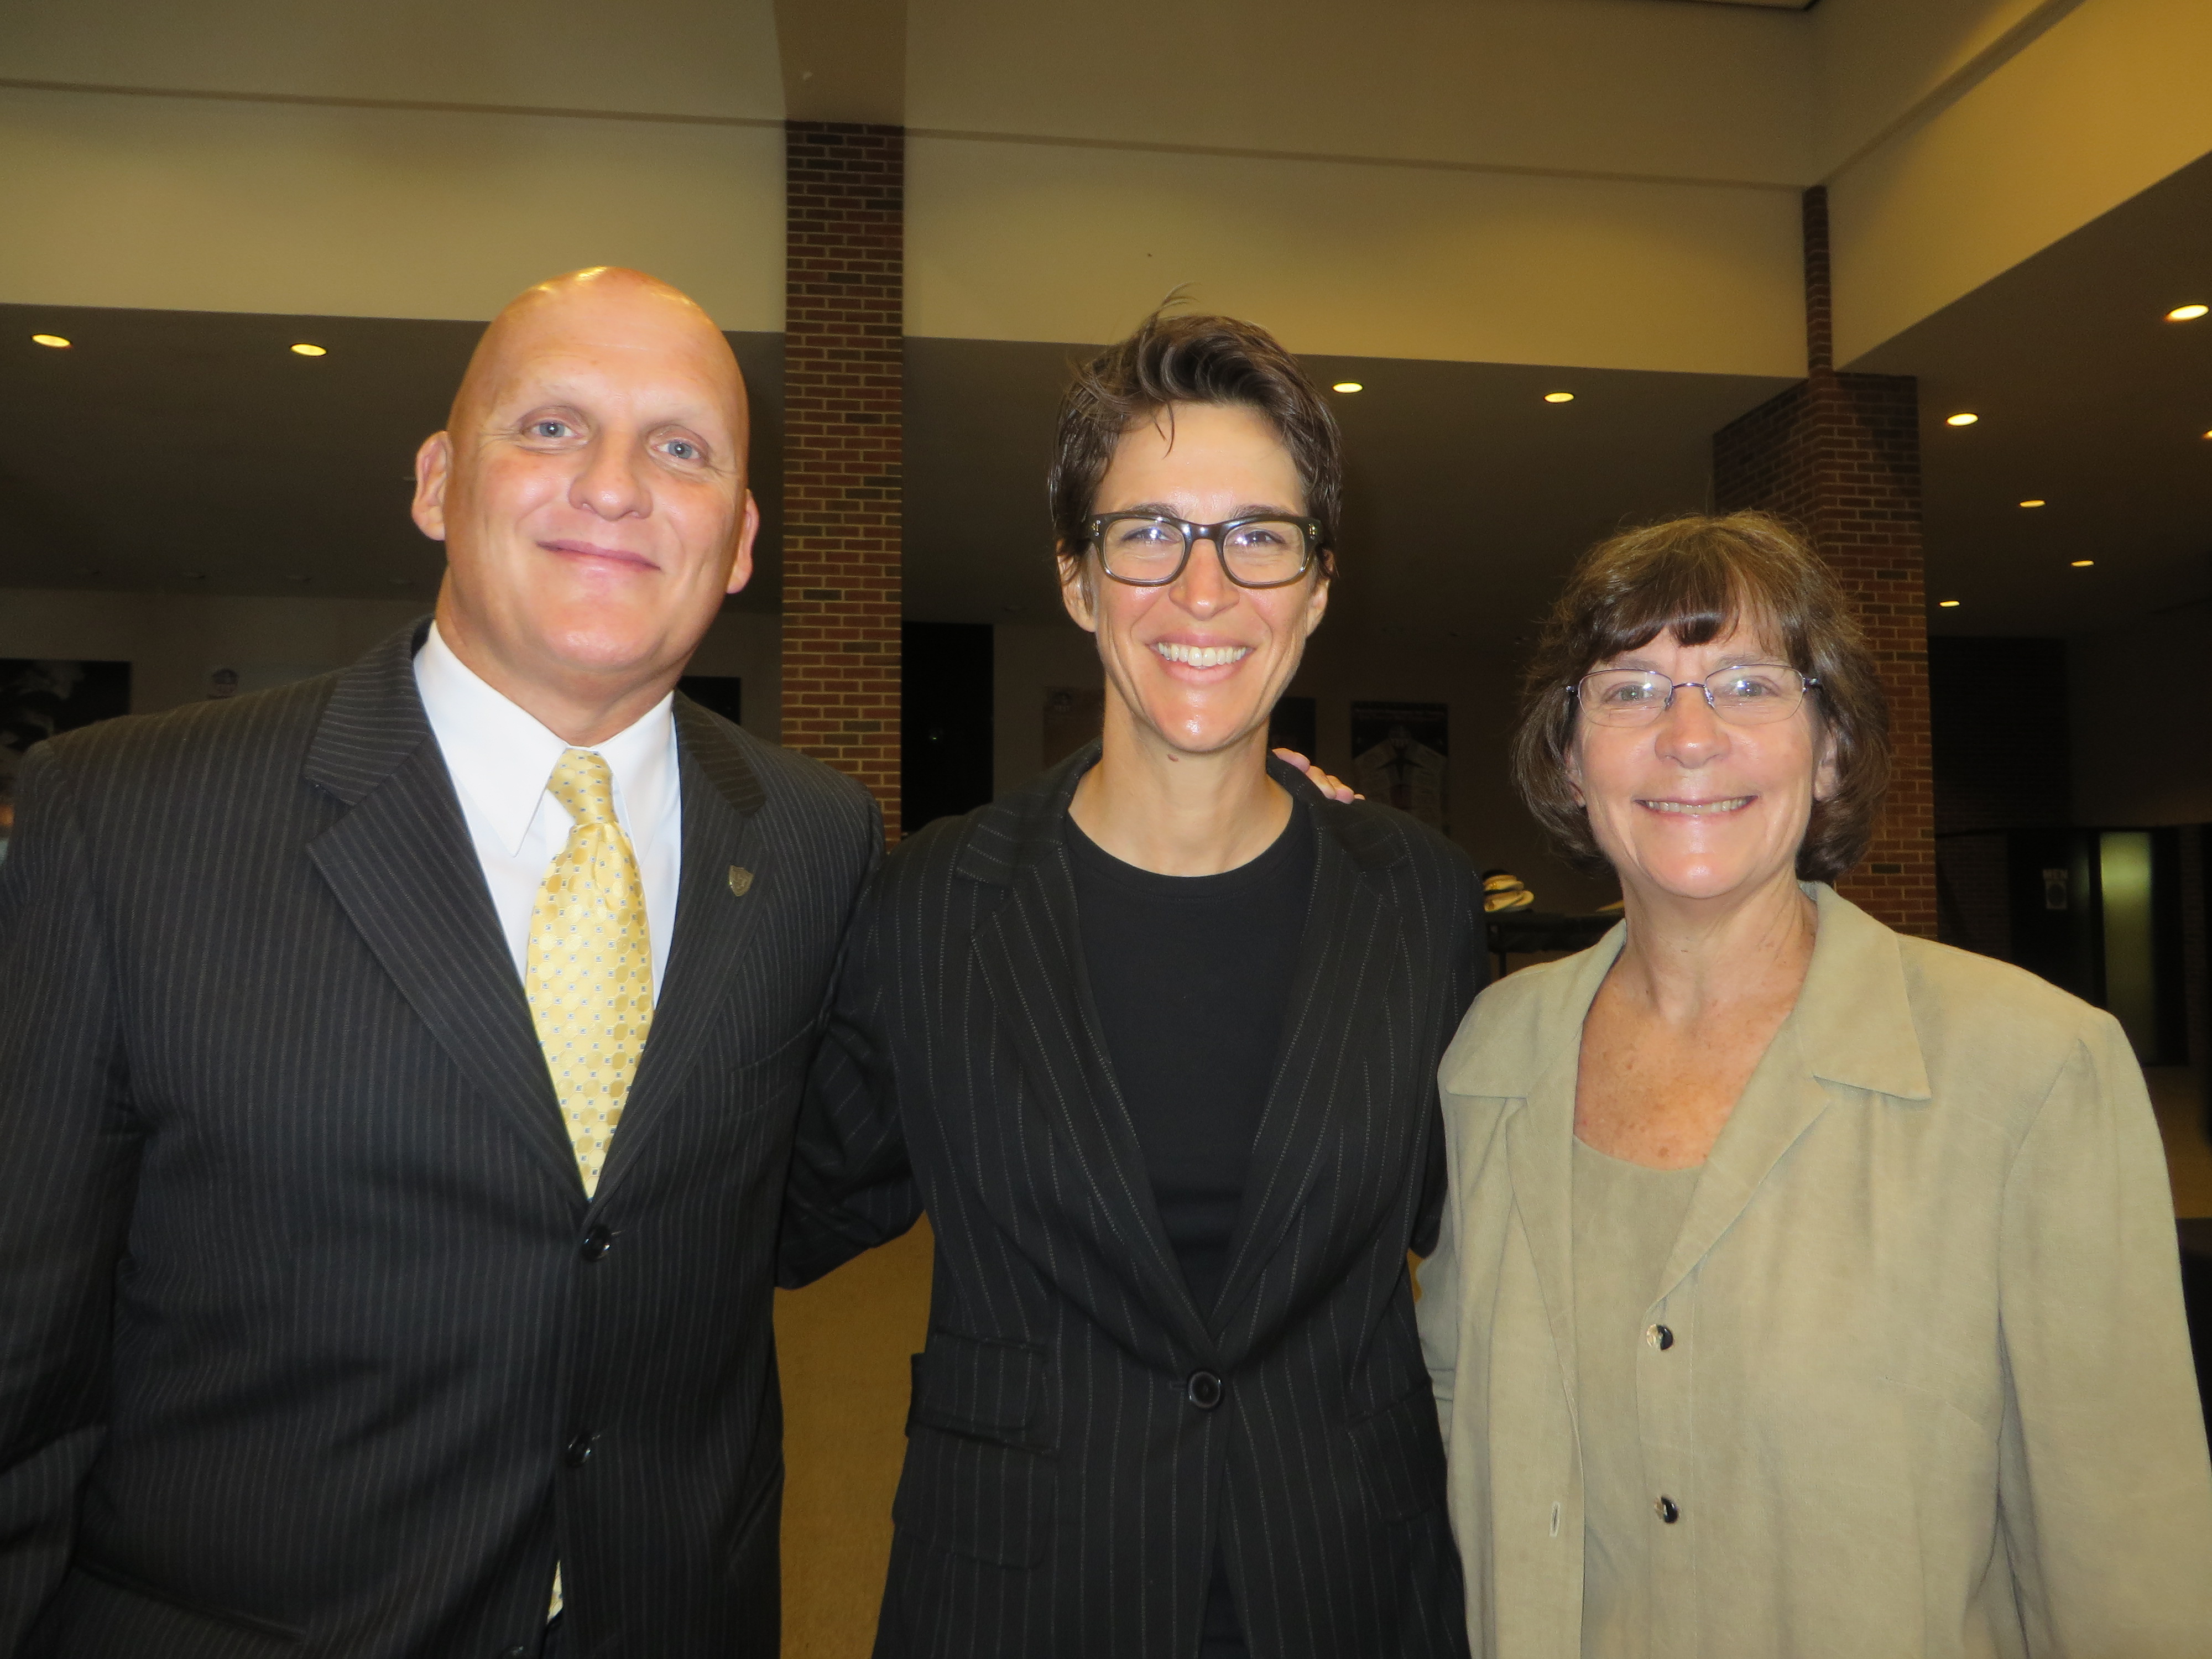 Dr. Clinton Longenecker, left, Stranahan Professor of Leadership and Organizational Excellence in the UT College of Business and Innovation, and his wife Cindy, right, pose with Rachel Maddow, center, host of the nationally broadcast “The Rachel Maddow Show” when Longenecker and Maddow were both keynote speakers at a recent conference at the United States Military Academy at West Point, New York.